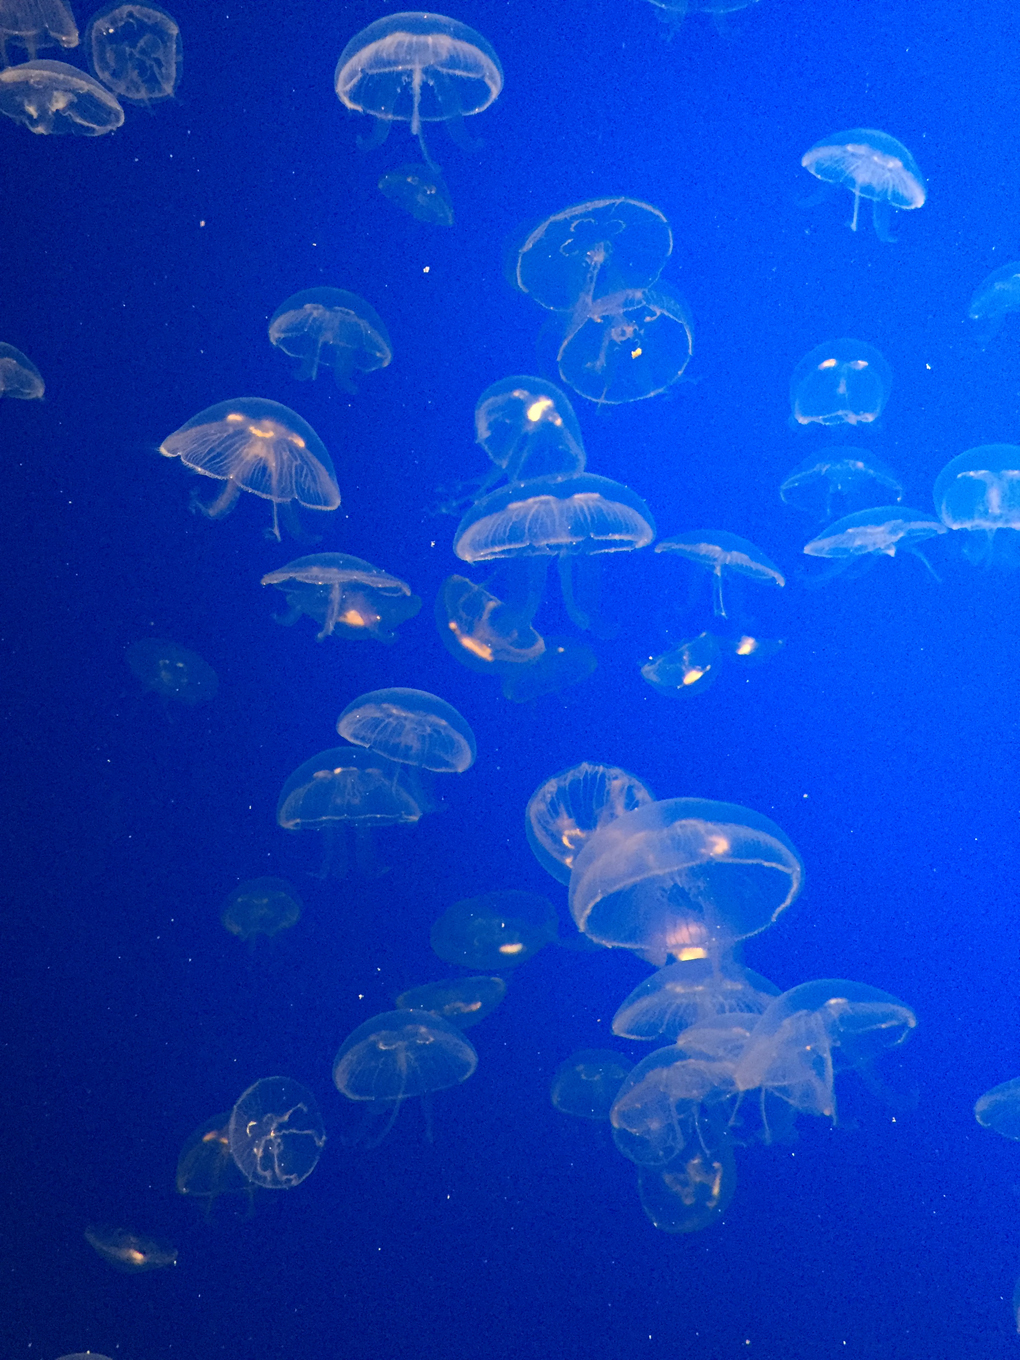 A swarm of tiny jellyfish in a tank